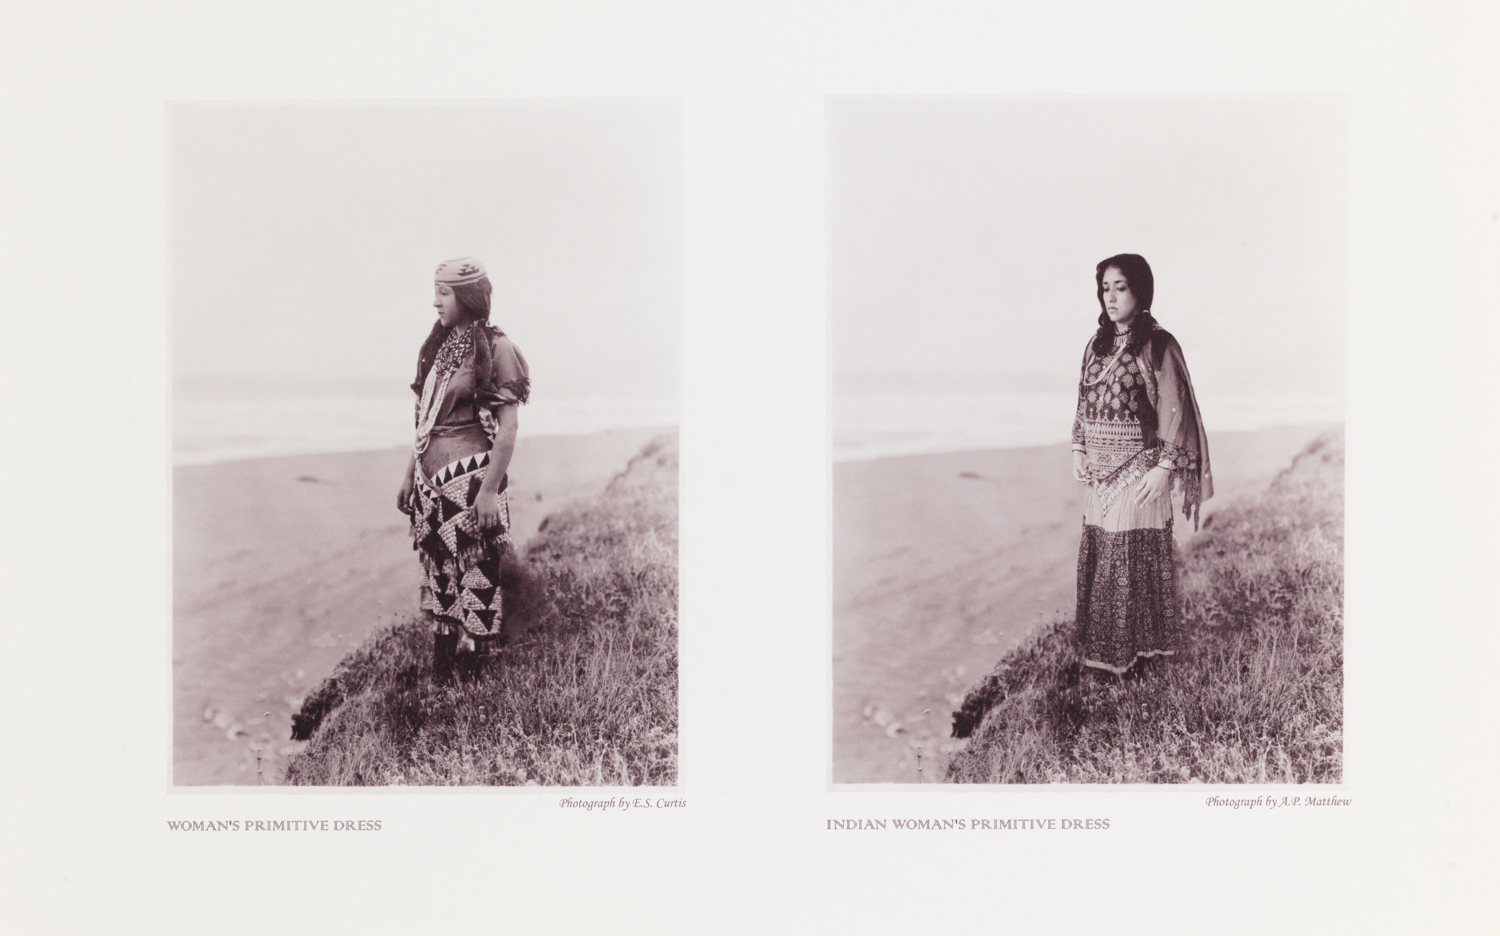 Primitive dress, from the series "An Indian from India - Portfolio I"